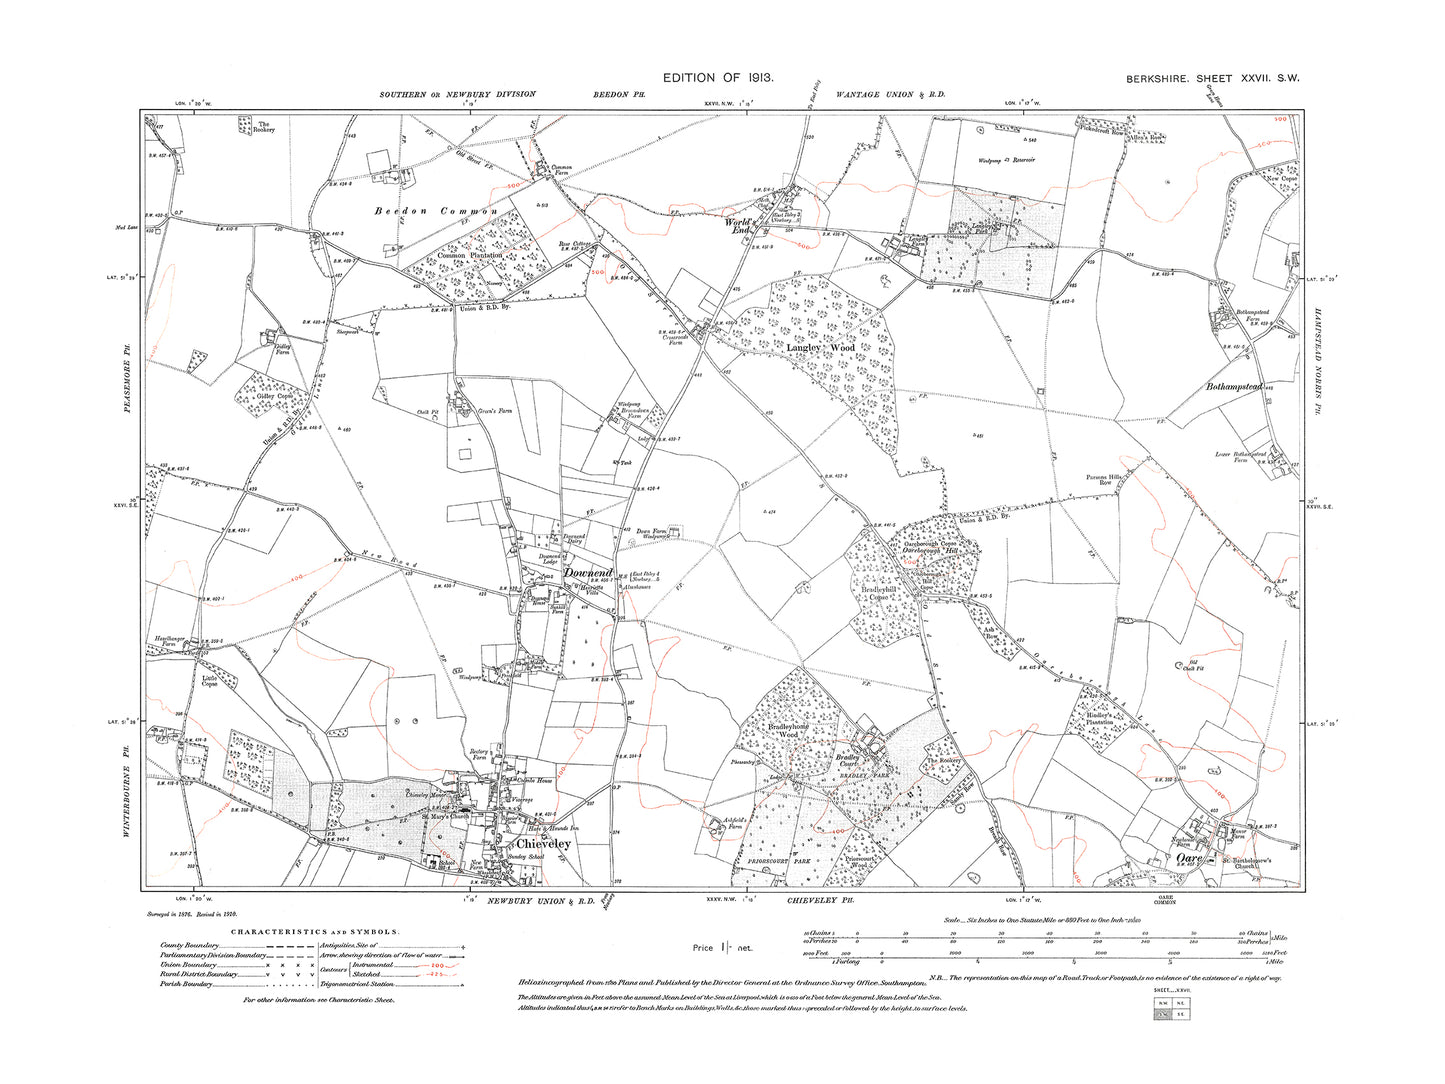 A 1913 map showing Downend, Chieveley (north), World's End, Oare in Berkshire - OS 1:10560 scale map, Berks 27SW